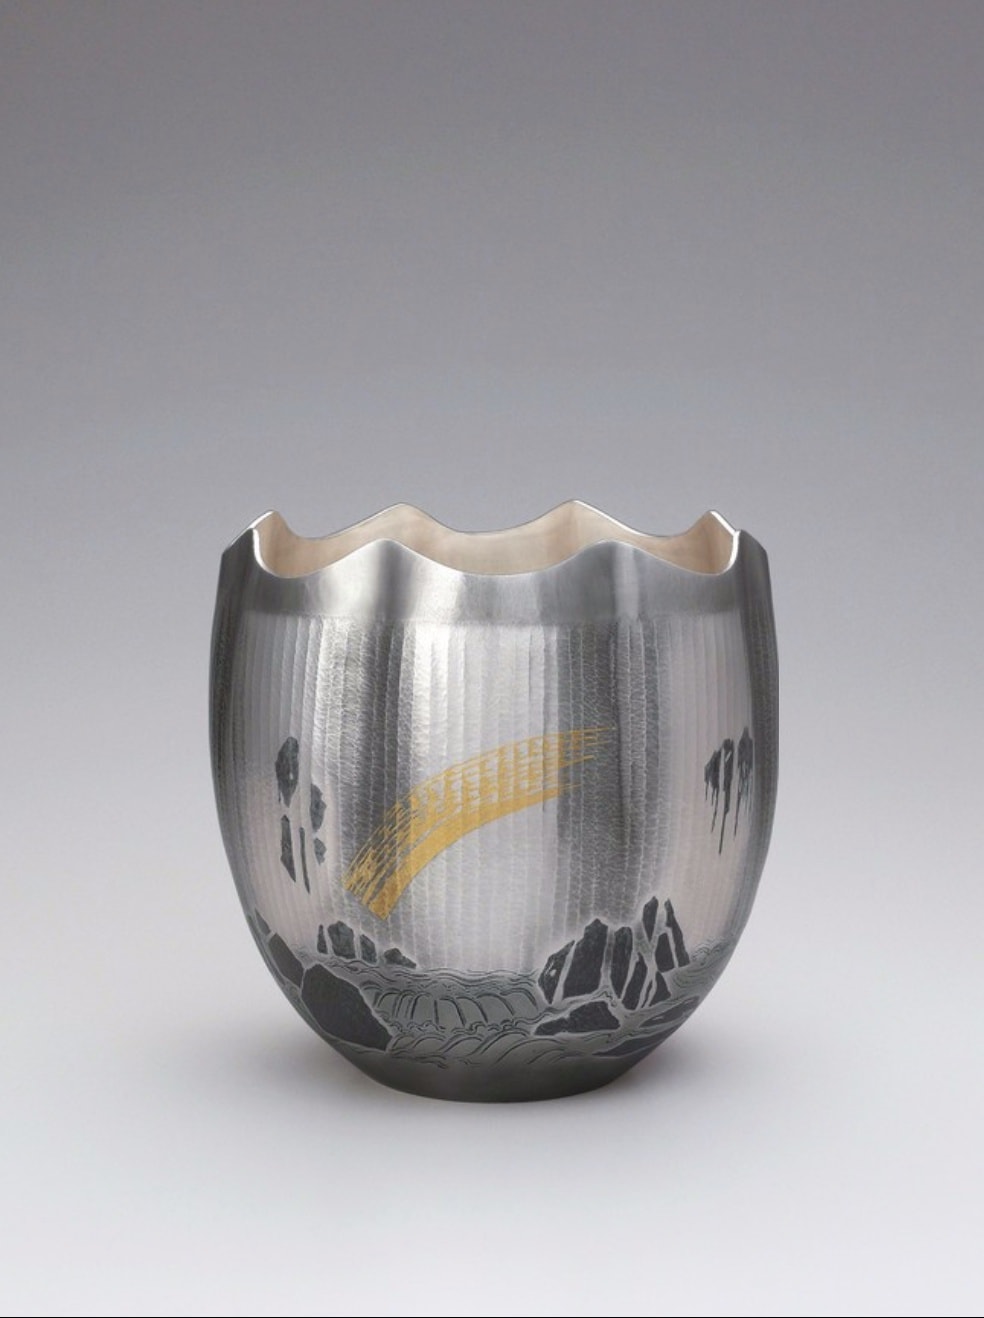 The Cosmos Within: Contemporary Japanese Metalwork and Ceramic